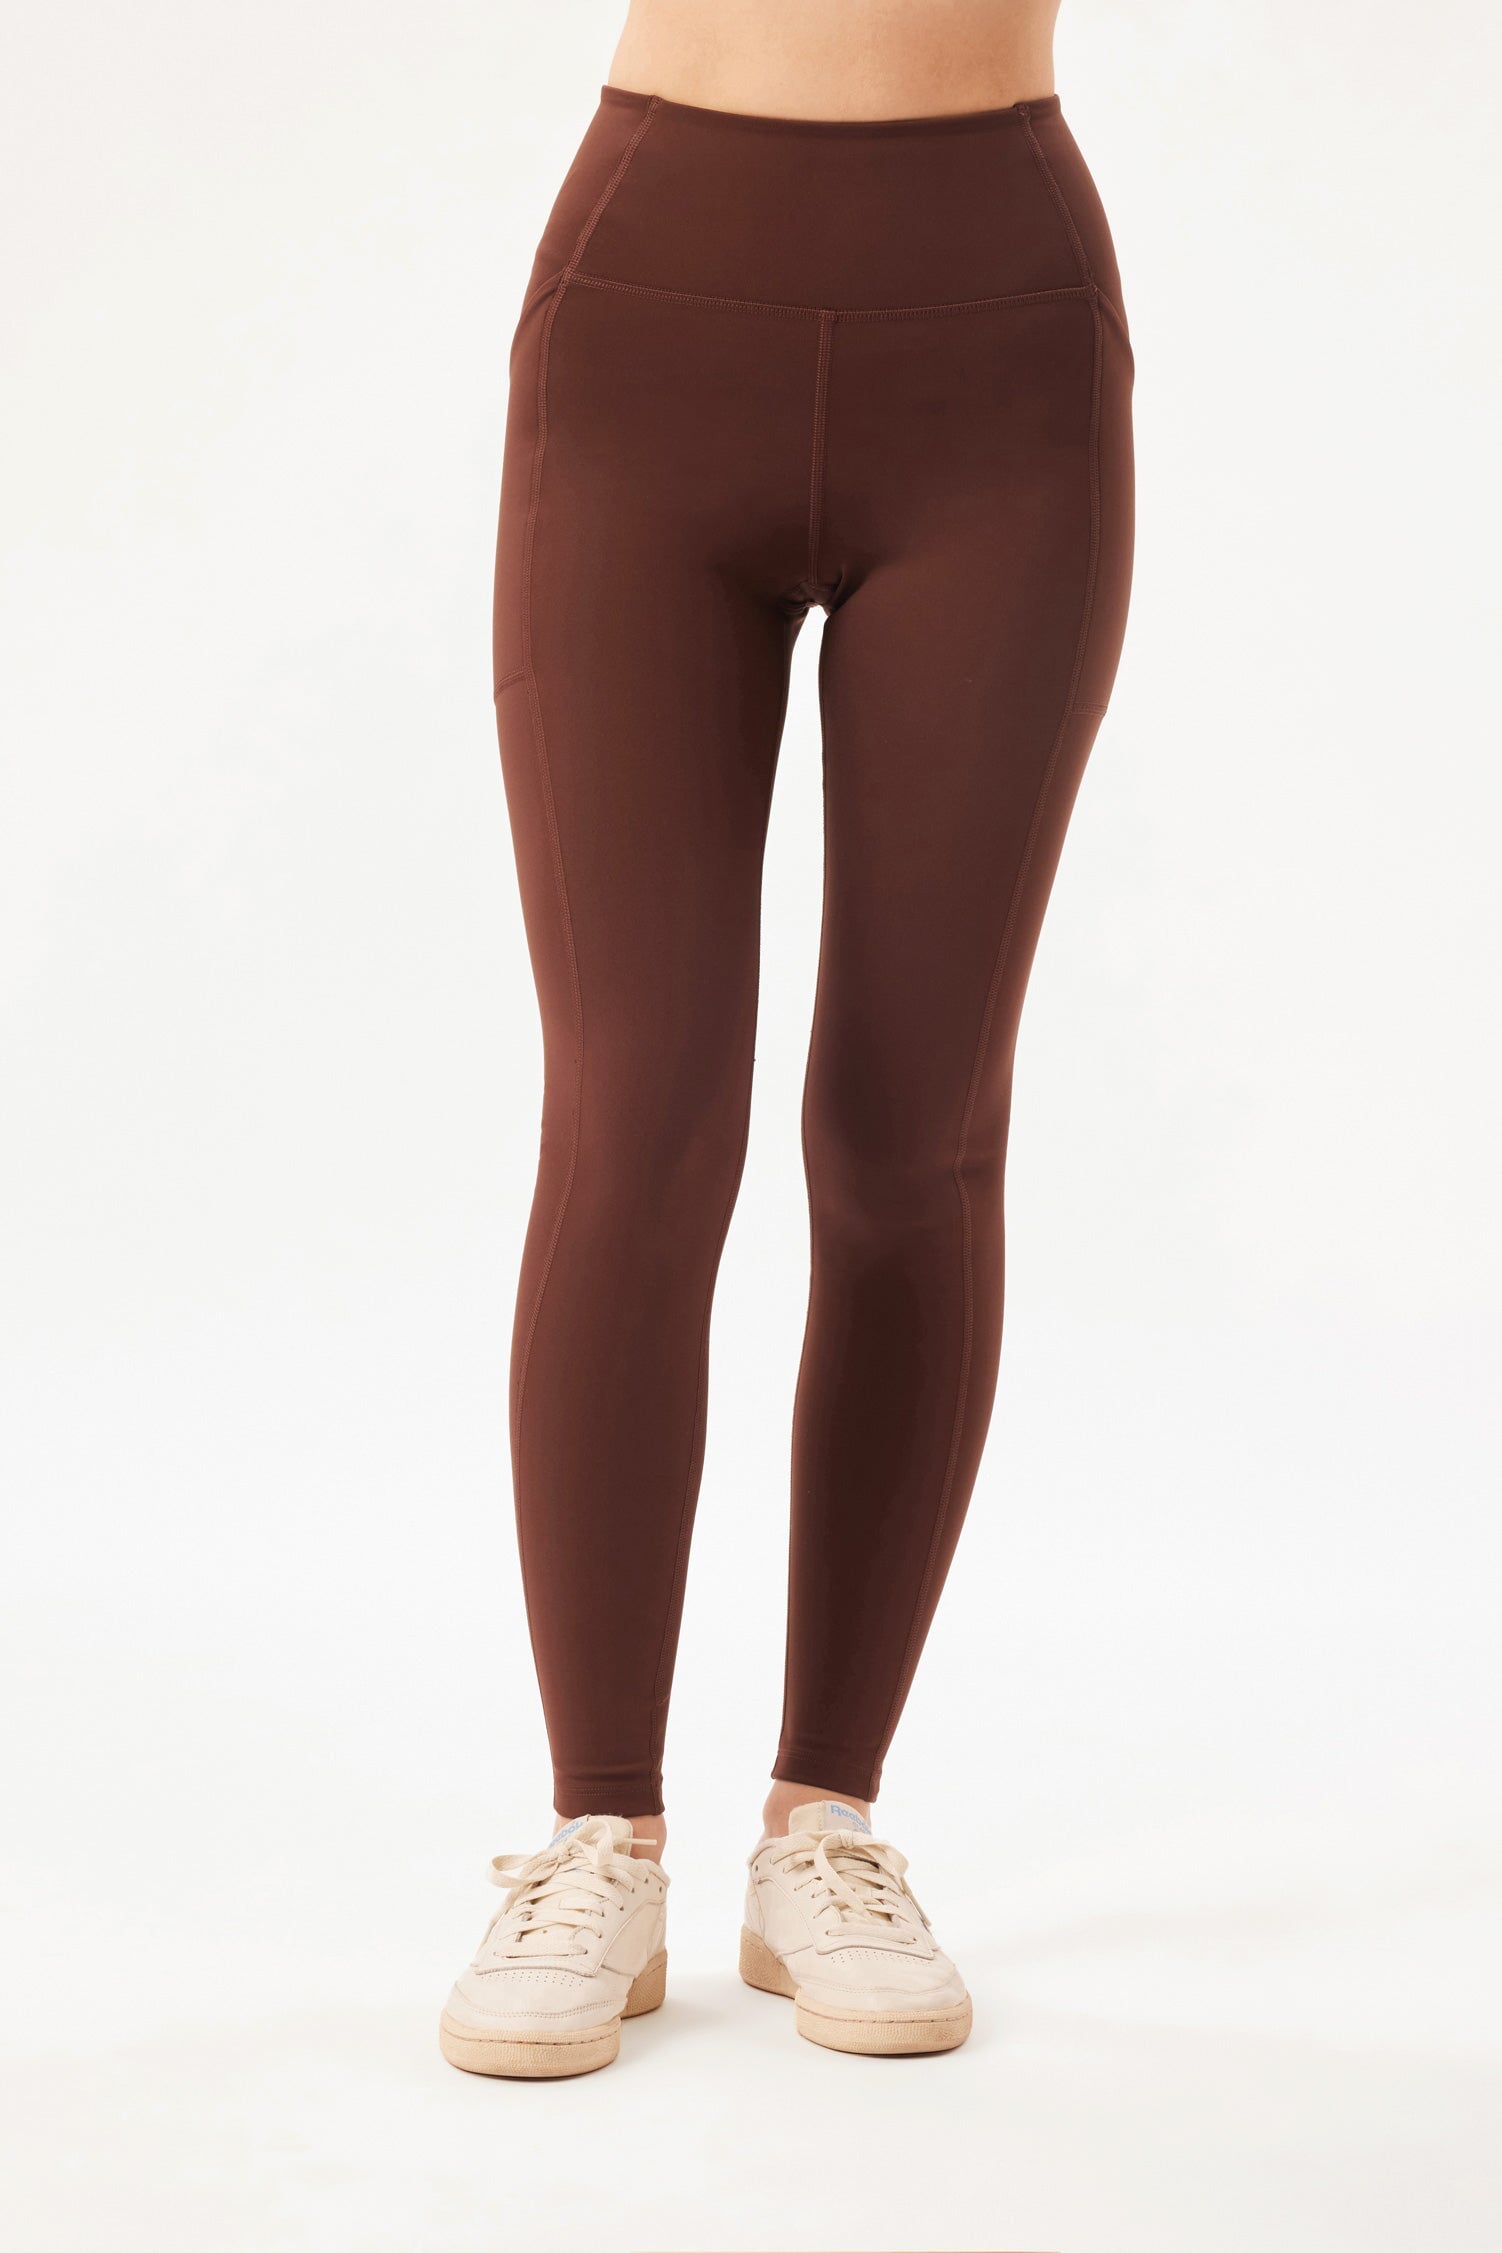 Brown Solid Color Women's Shorts, Earth Brown Designer Gym Tights